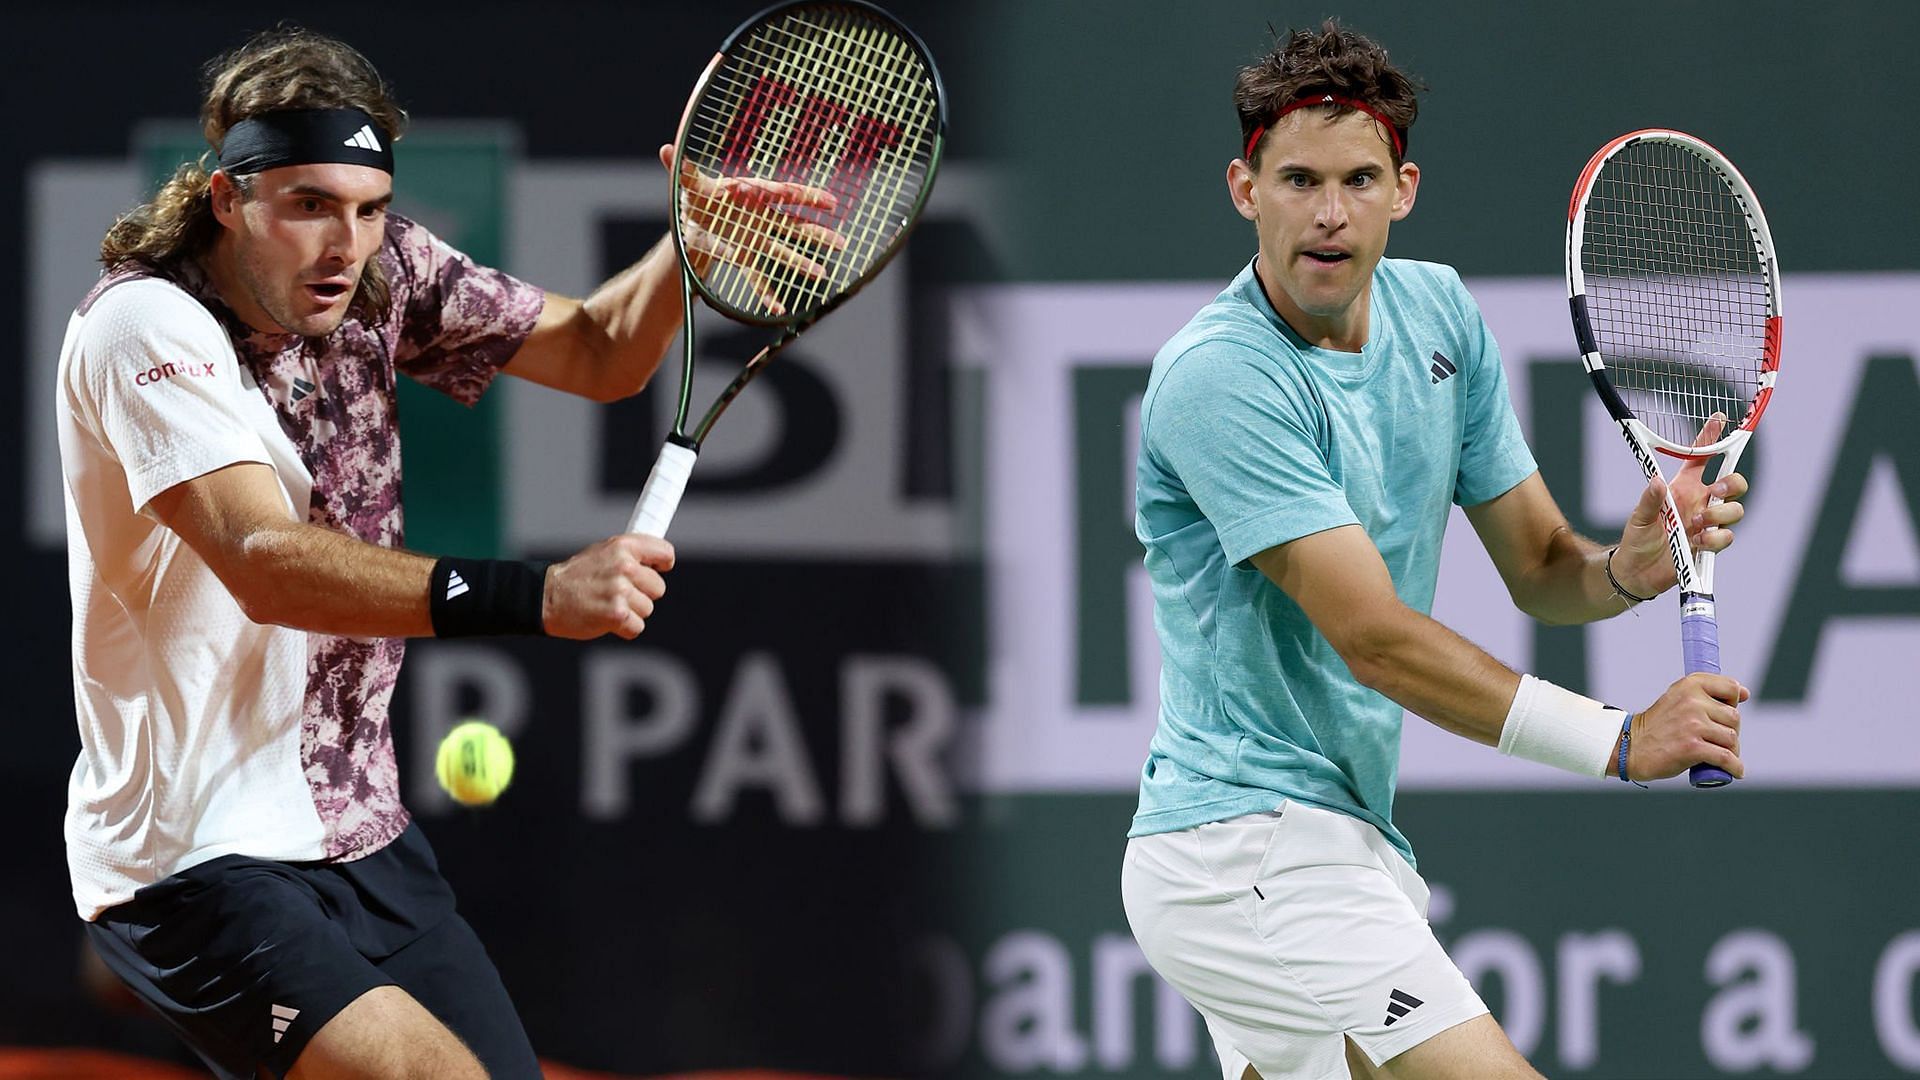 Stefanos Tsitsipas vs Dominic Thiem is one of the first-round matches at the 2023 Wimbledon.